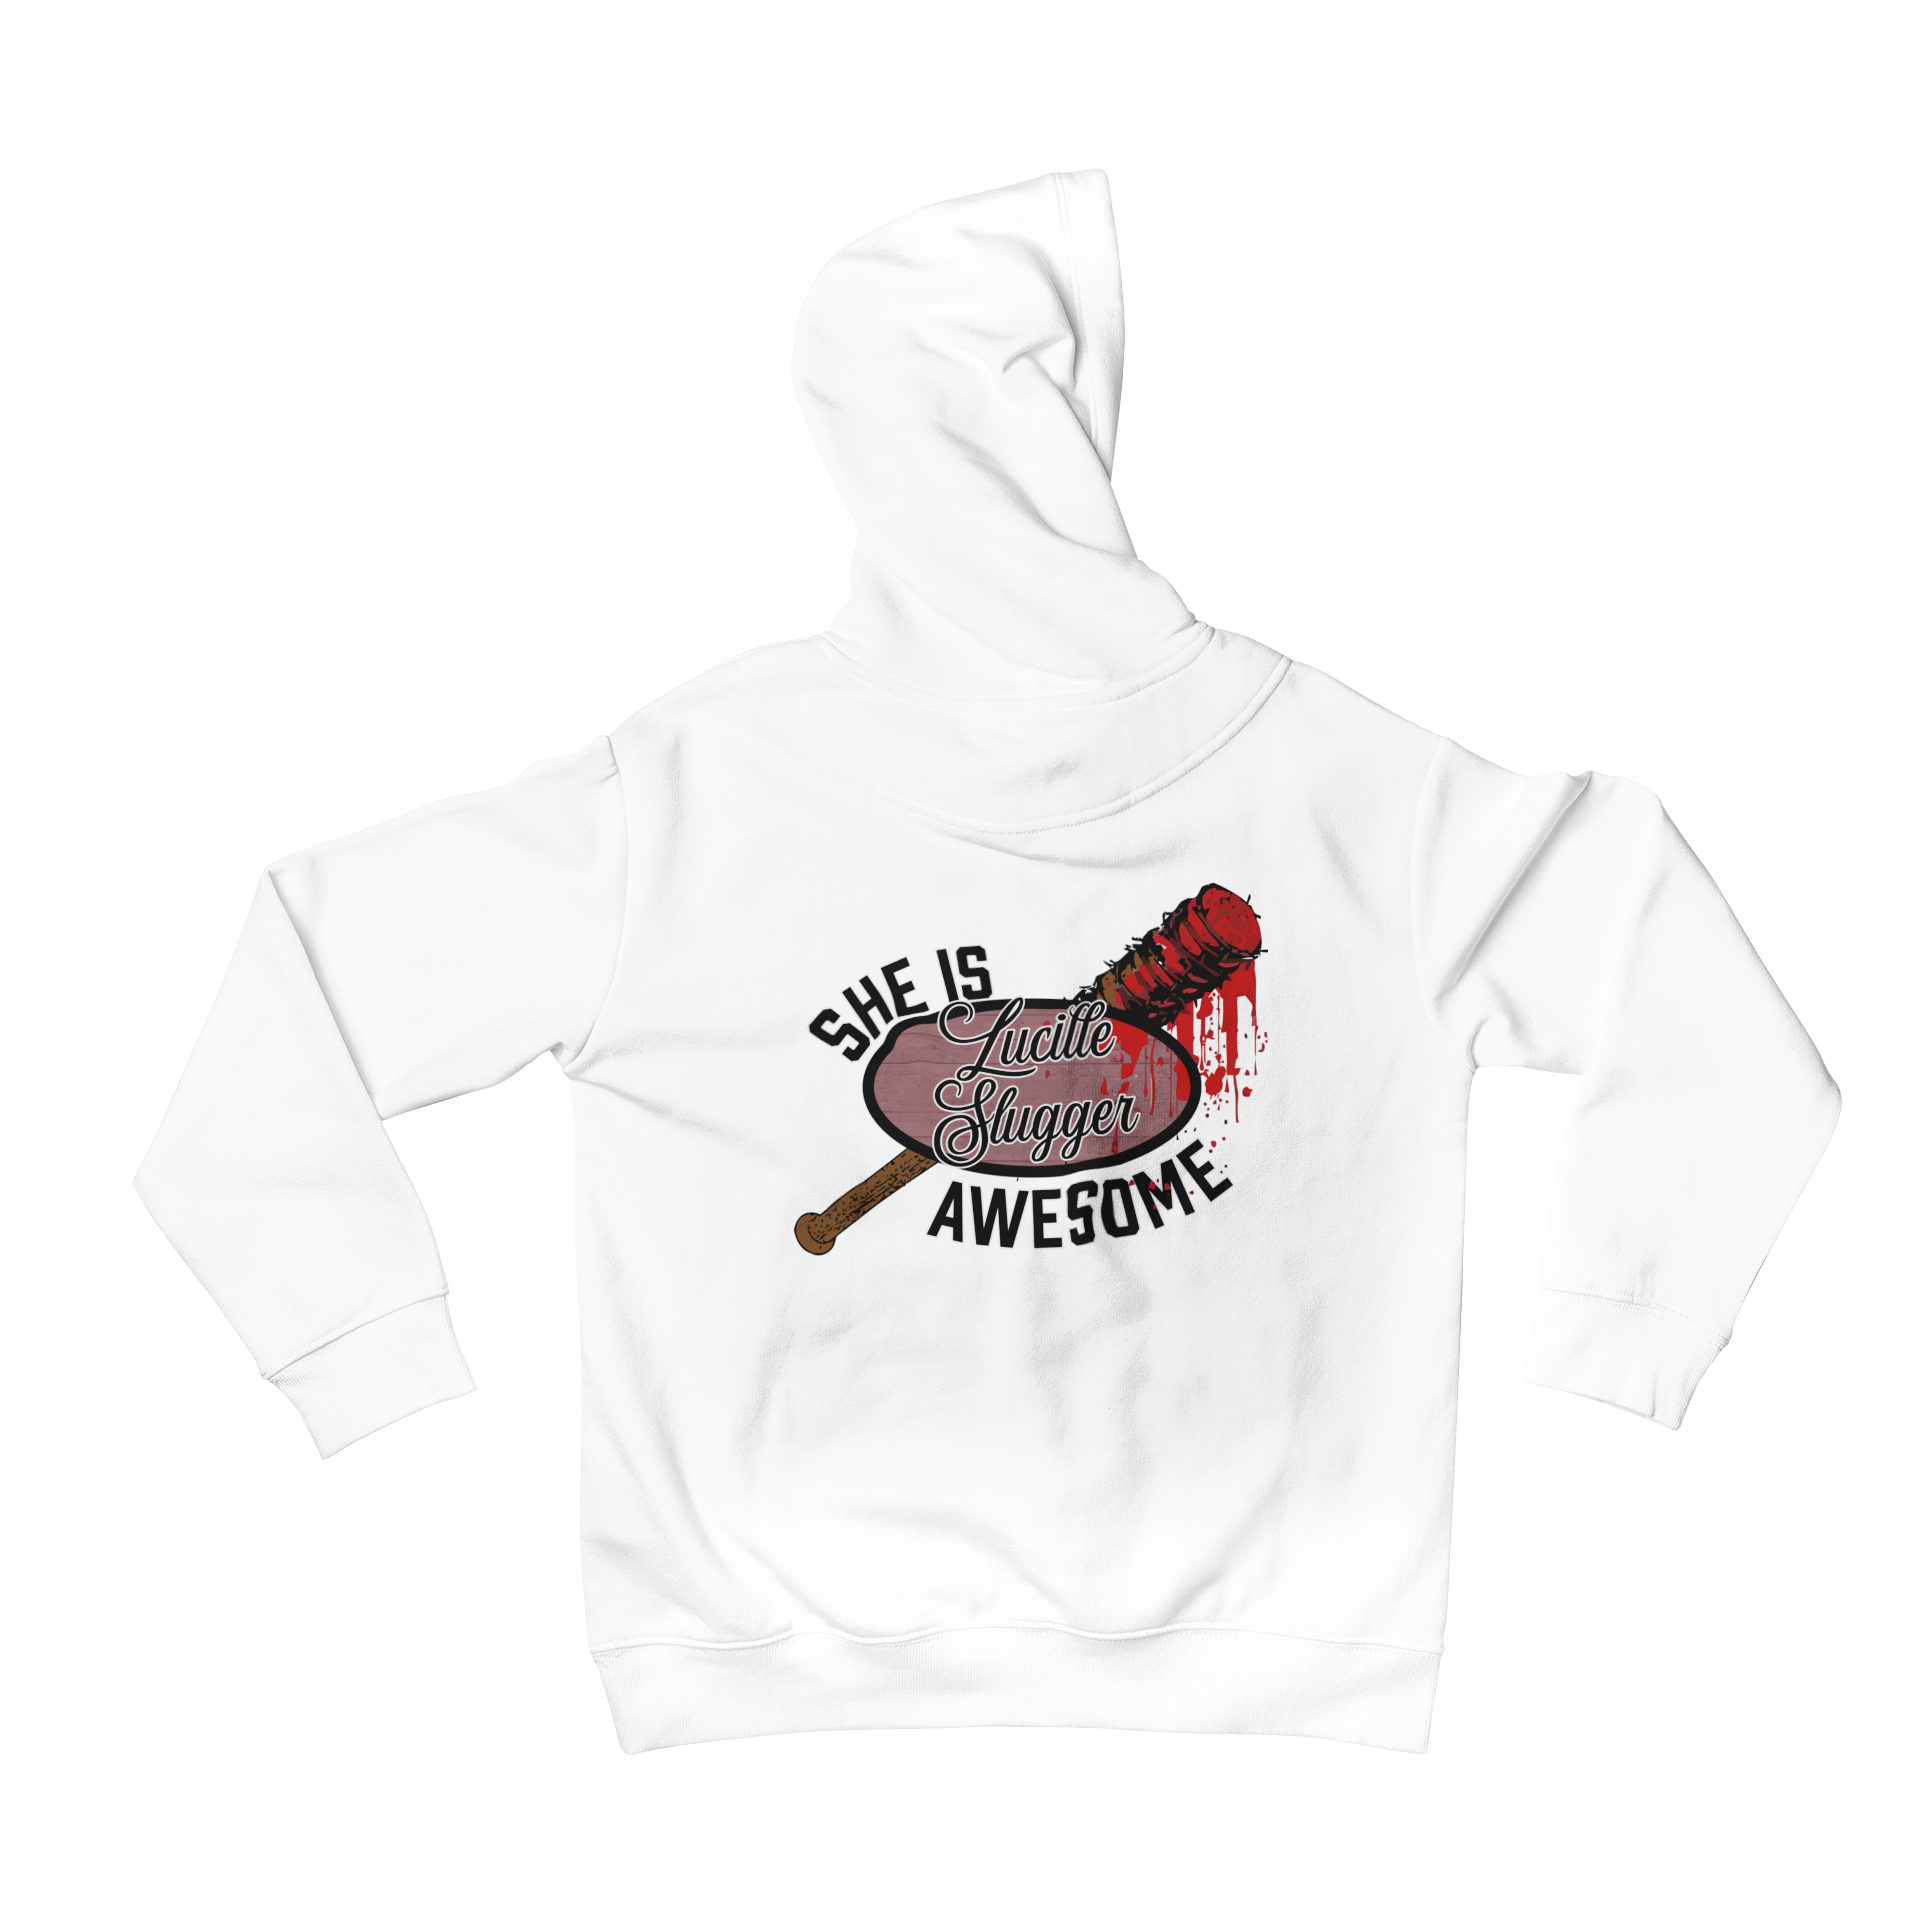 Are you a fan of The Walking Dead? Then you'll love our unique hoodie inspired by the show! The back print features "Lucille Slugger" and is perfect for any fan. Check out Teevolution today and show off your love for The Walking Dead.